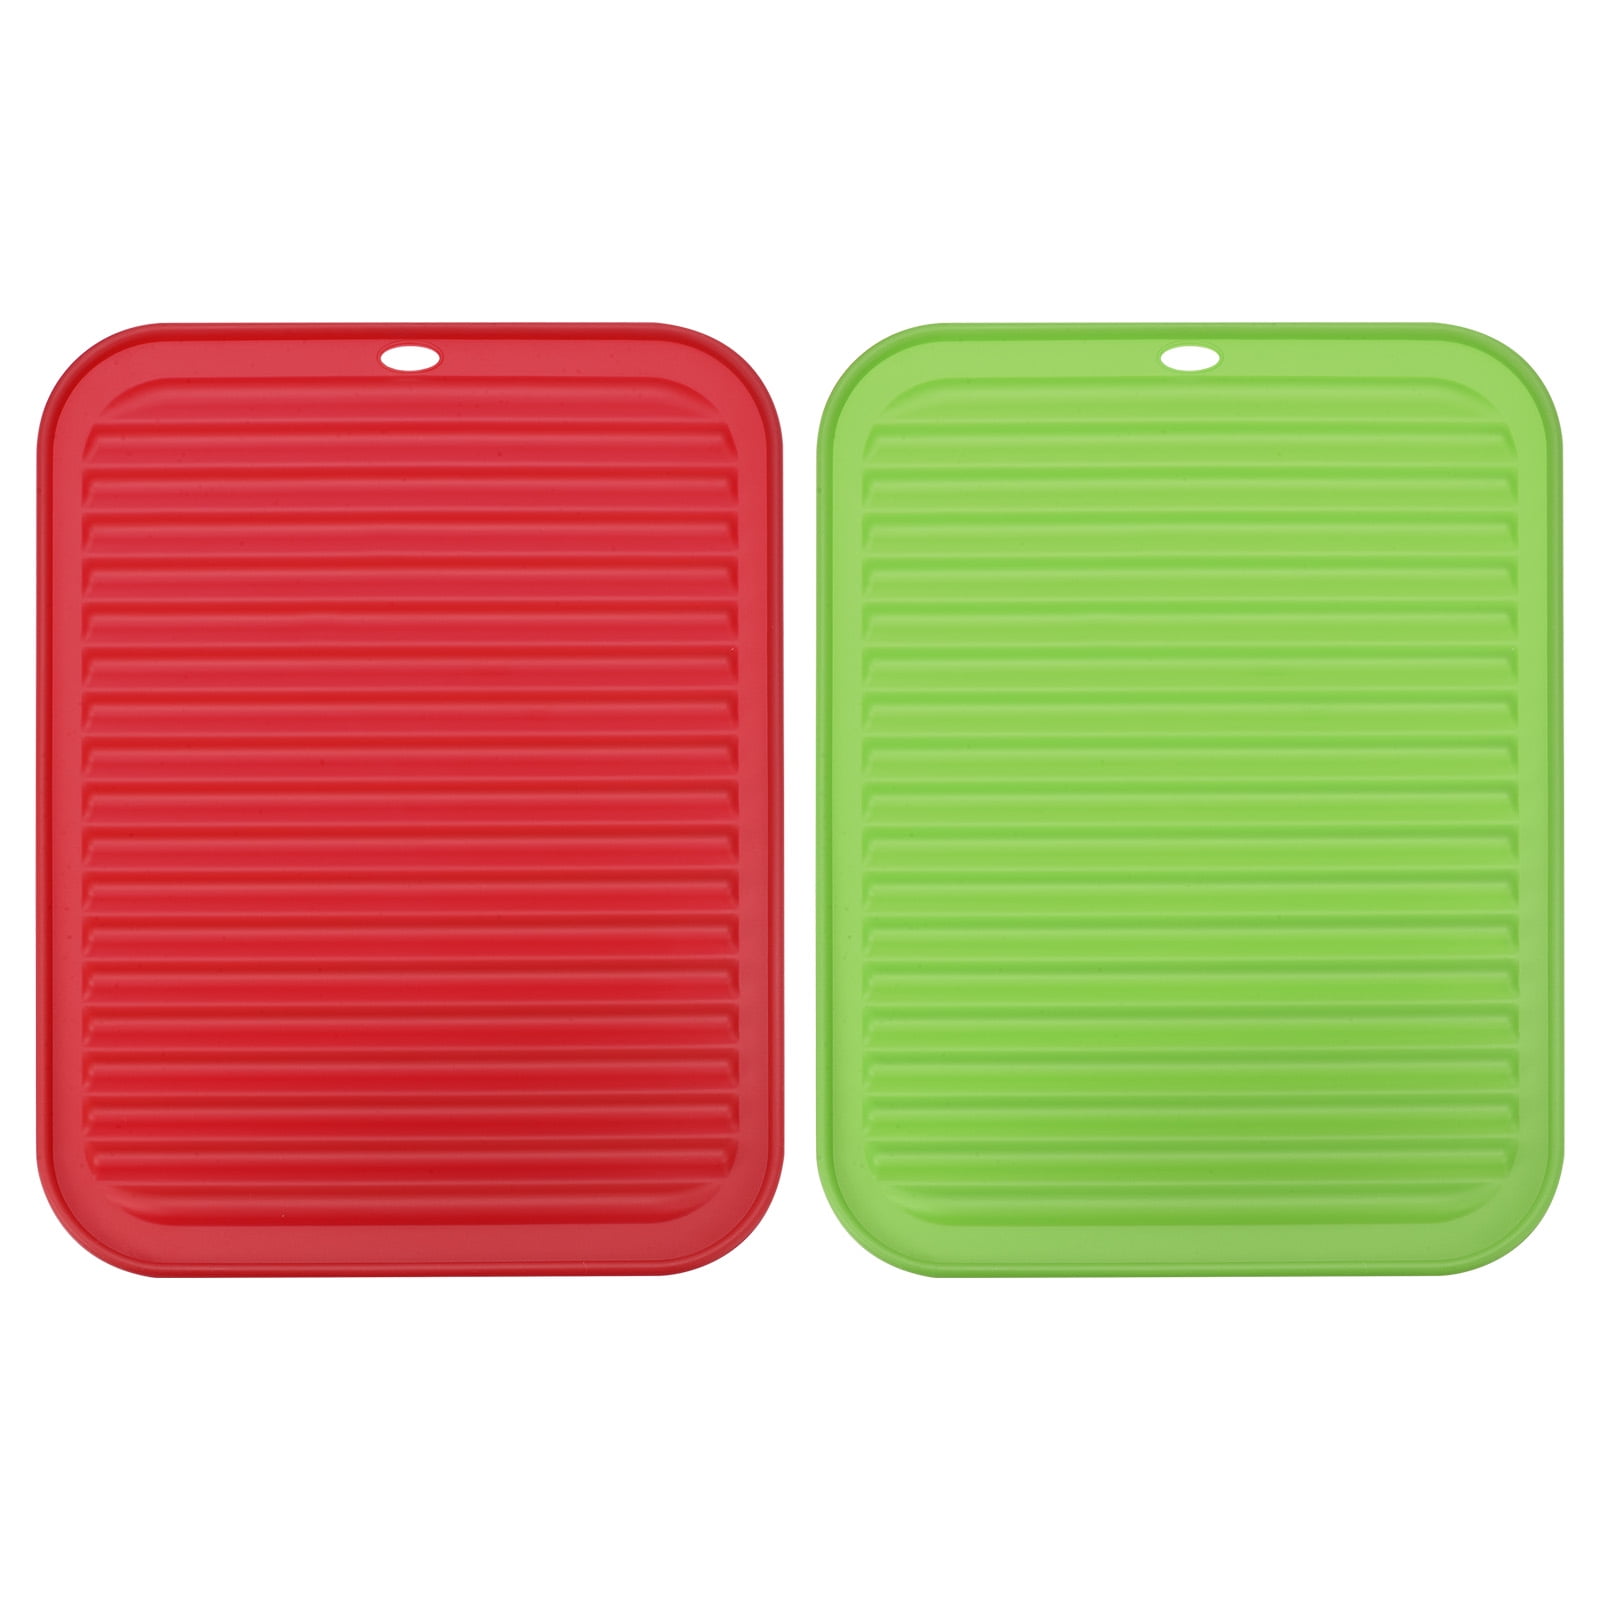 Uxcell Silicone Dish Drying Mat Set, 2 Pcs 8.5 x 6 Under Sink Drain Pad  Heat Resistant Suitable for Kitchen - Red 